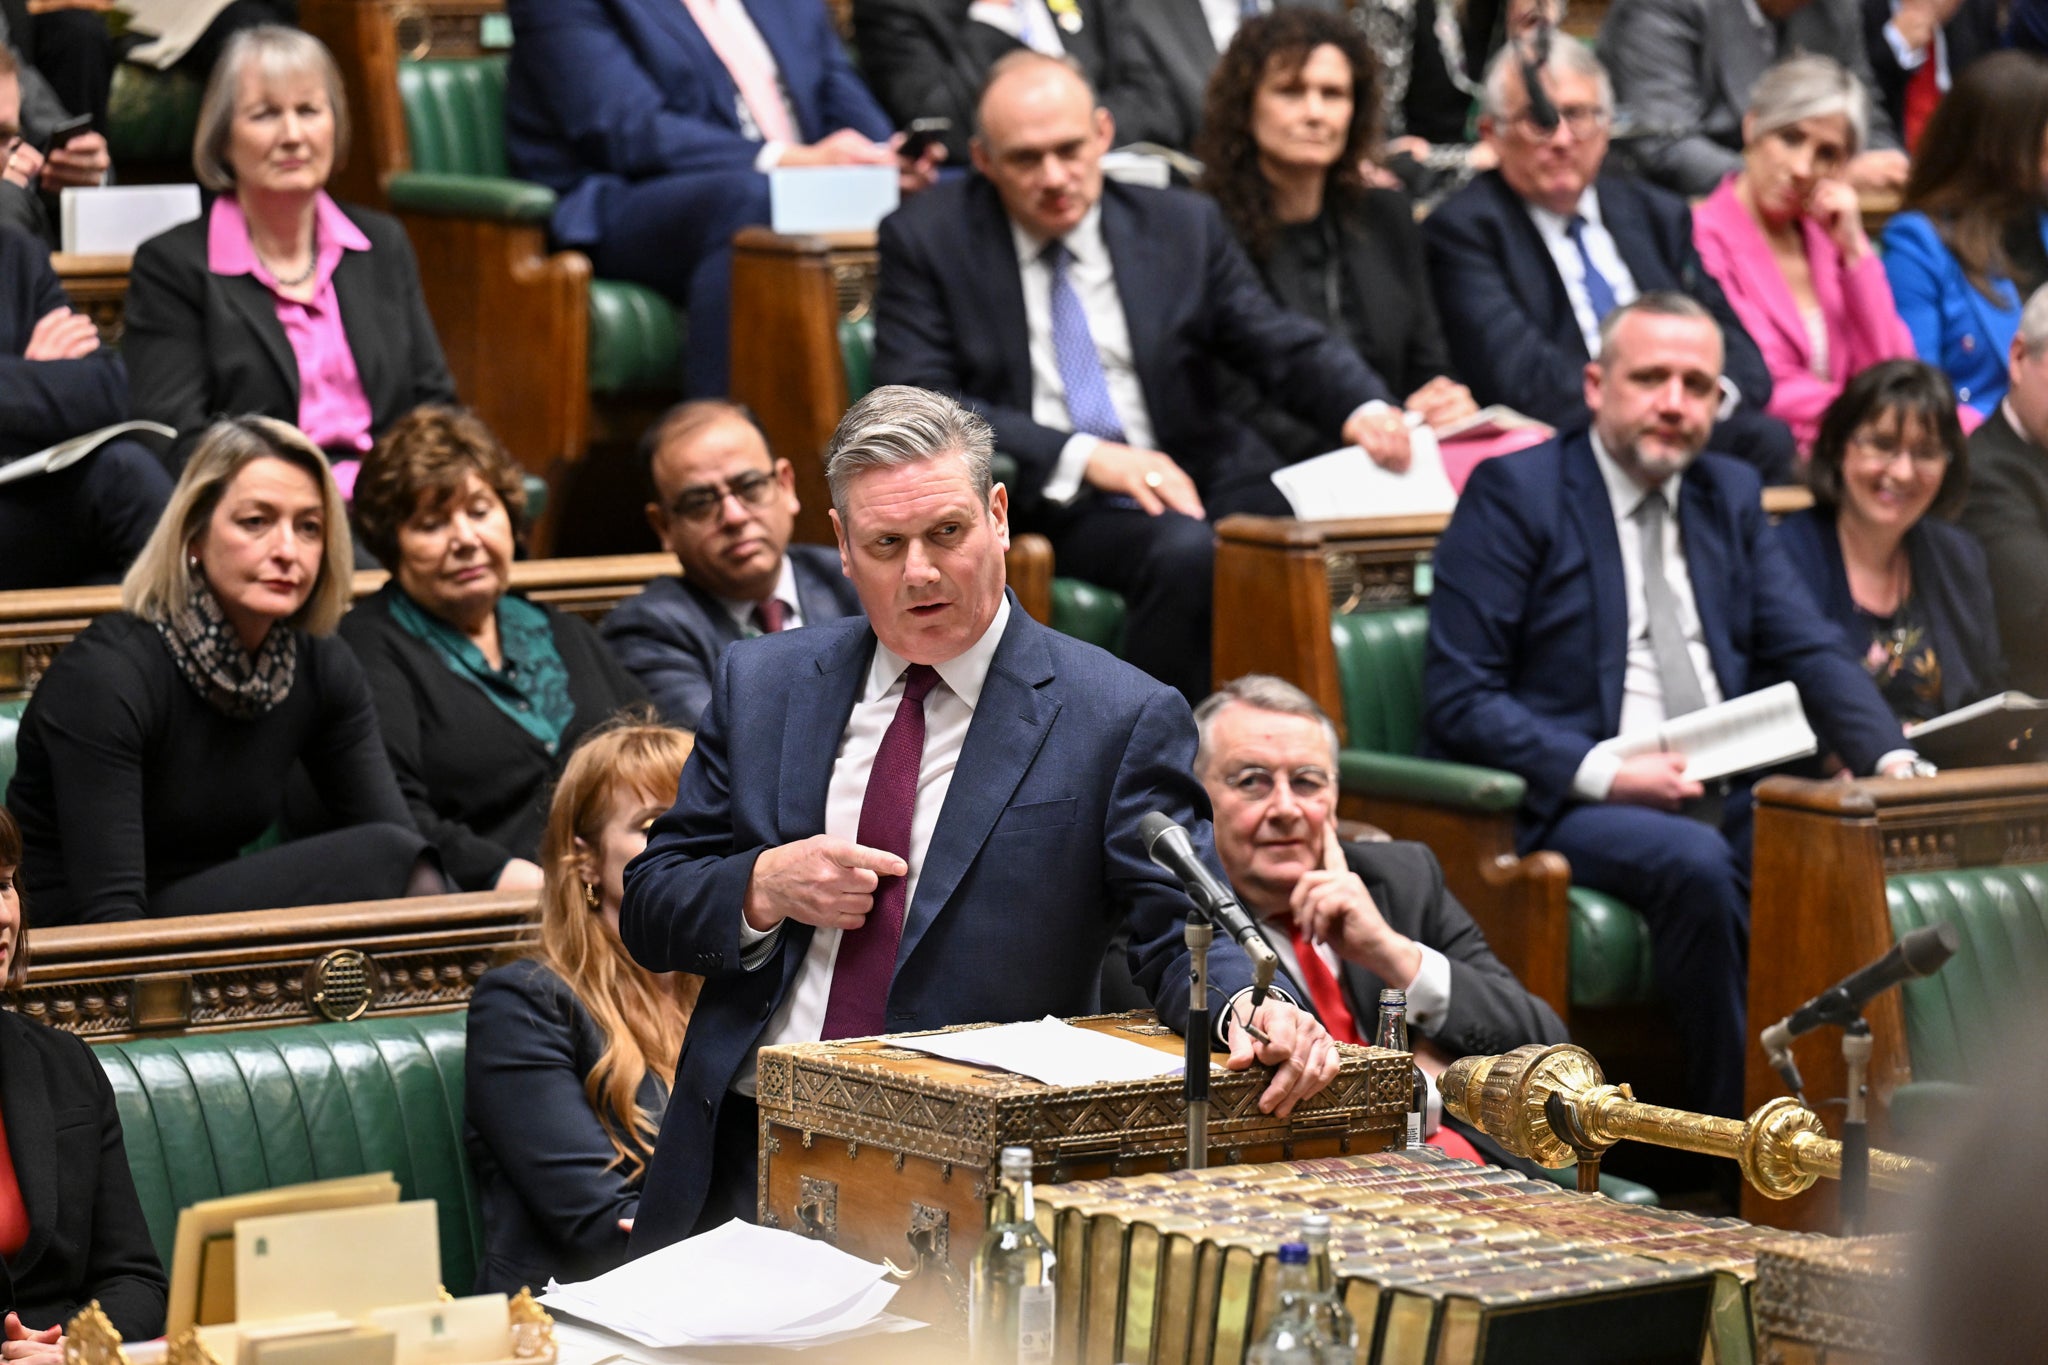 Sir Keir Starmer rejected suggestions from Cabinet minister Kemi Badenoch that he was trying to weaponise’ the exchange during Prime Minister’s Questions